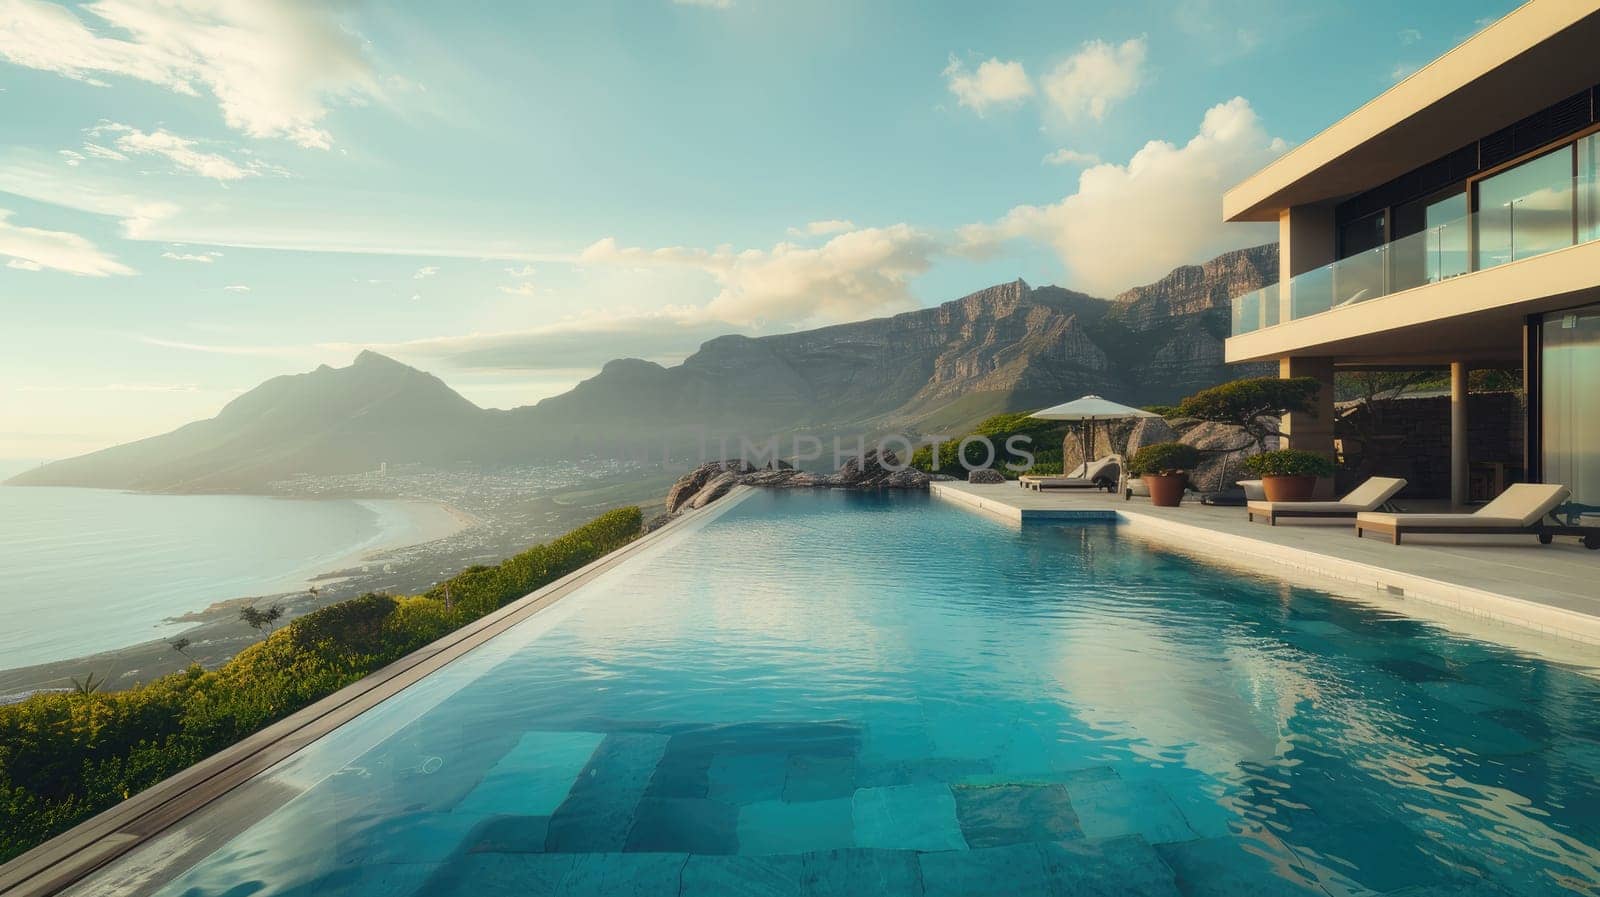 A wide shot of an infinity pool overlooking a stunning landscape, like mountains or the ocean